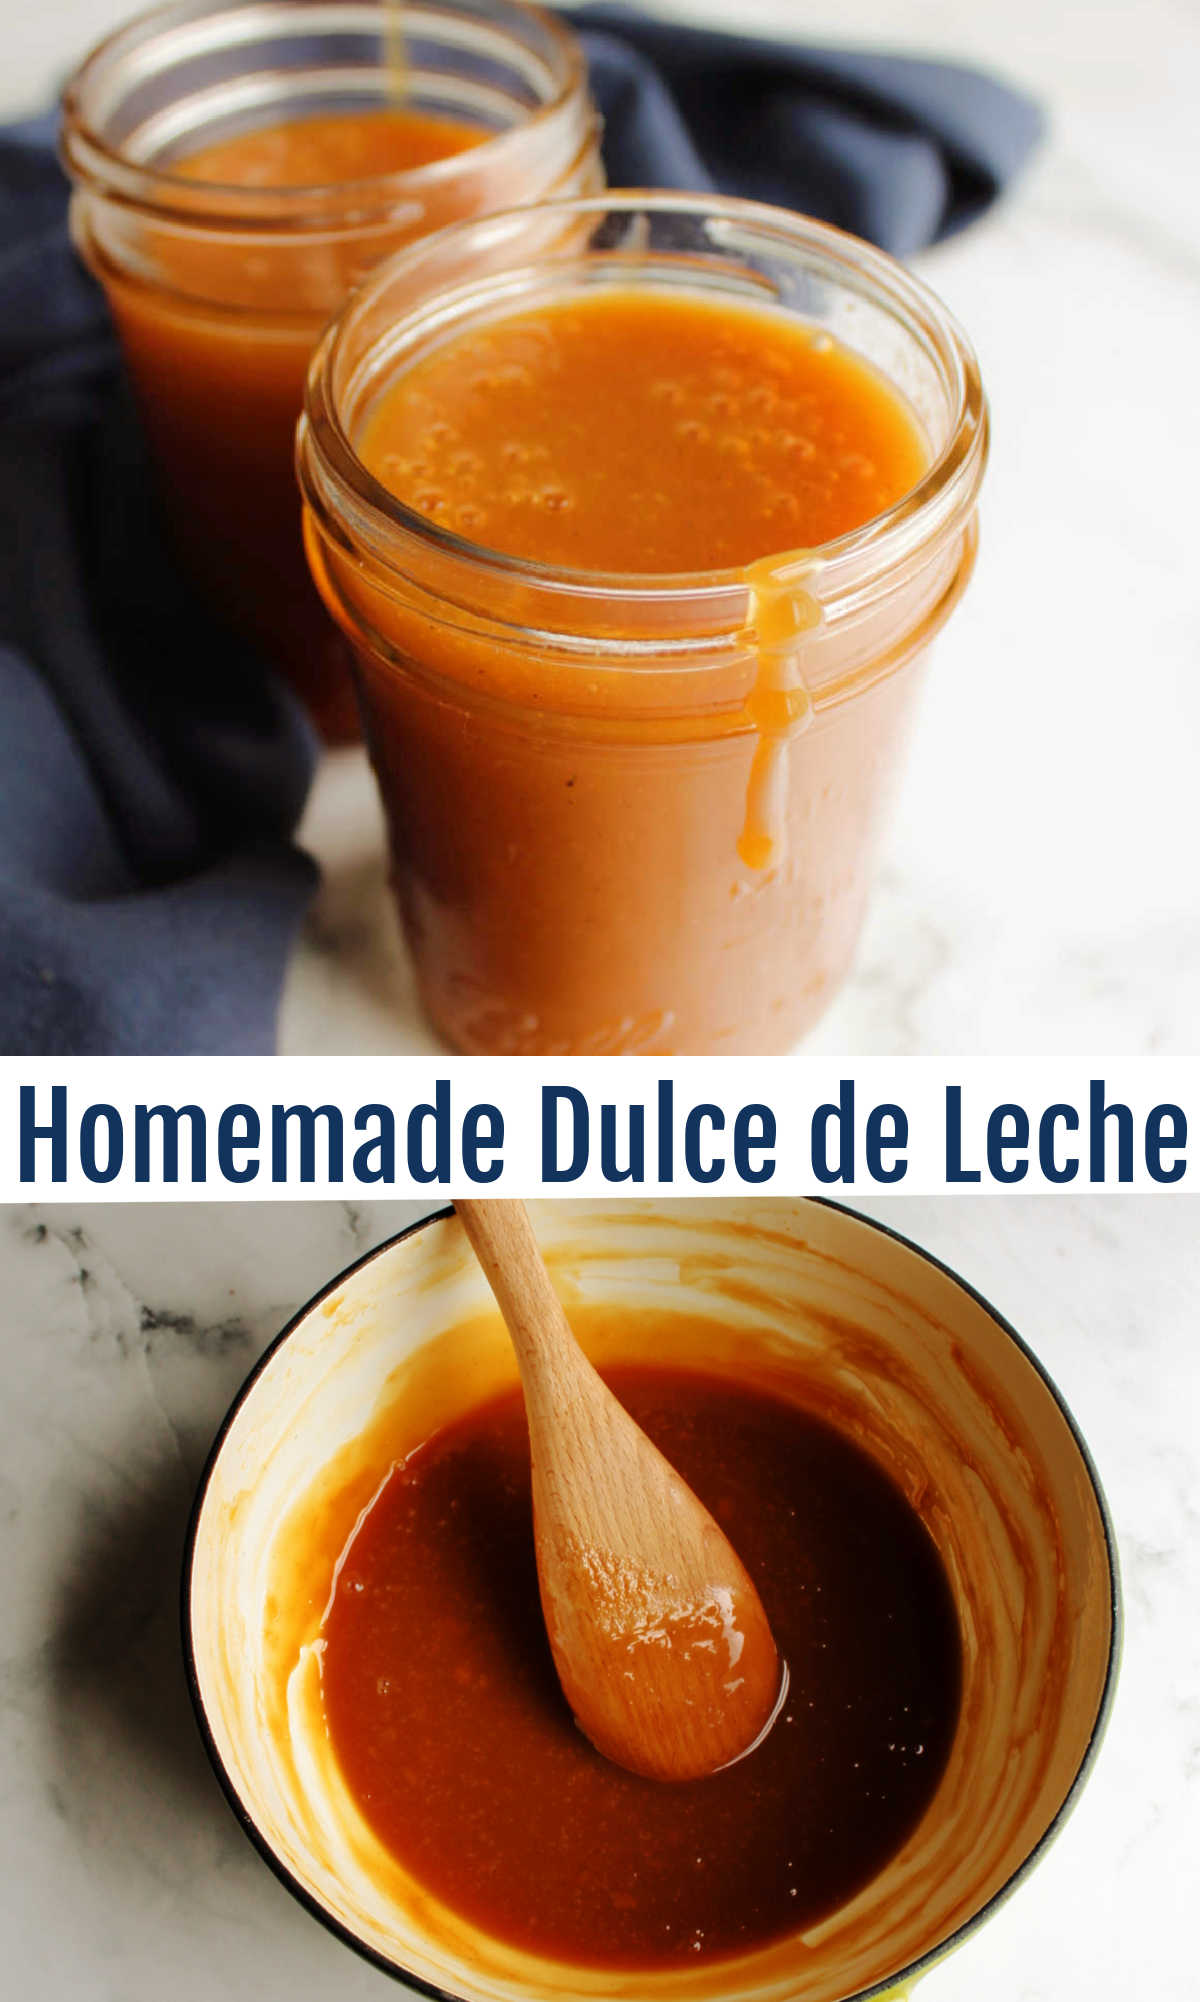 The creamy, sweet, gooey goodness that is dulce de leche isn’t that hard to make. With a little patience and 4 ingredients you can make this caramelized milk sauce.